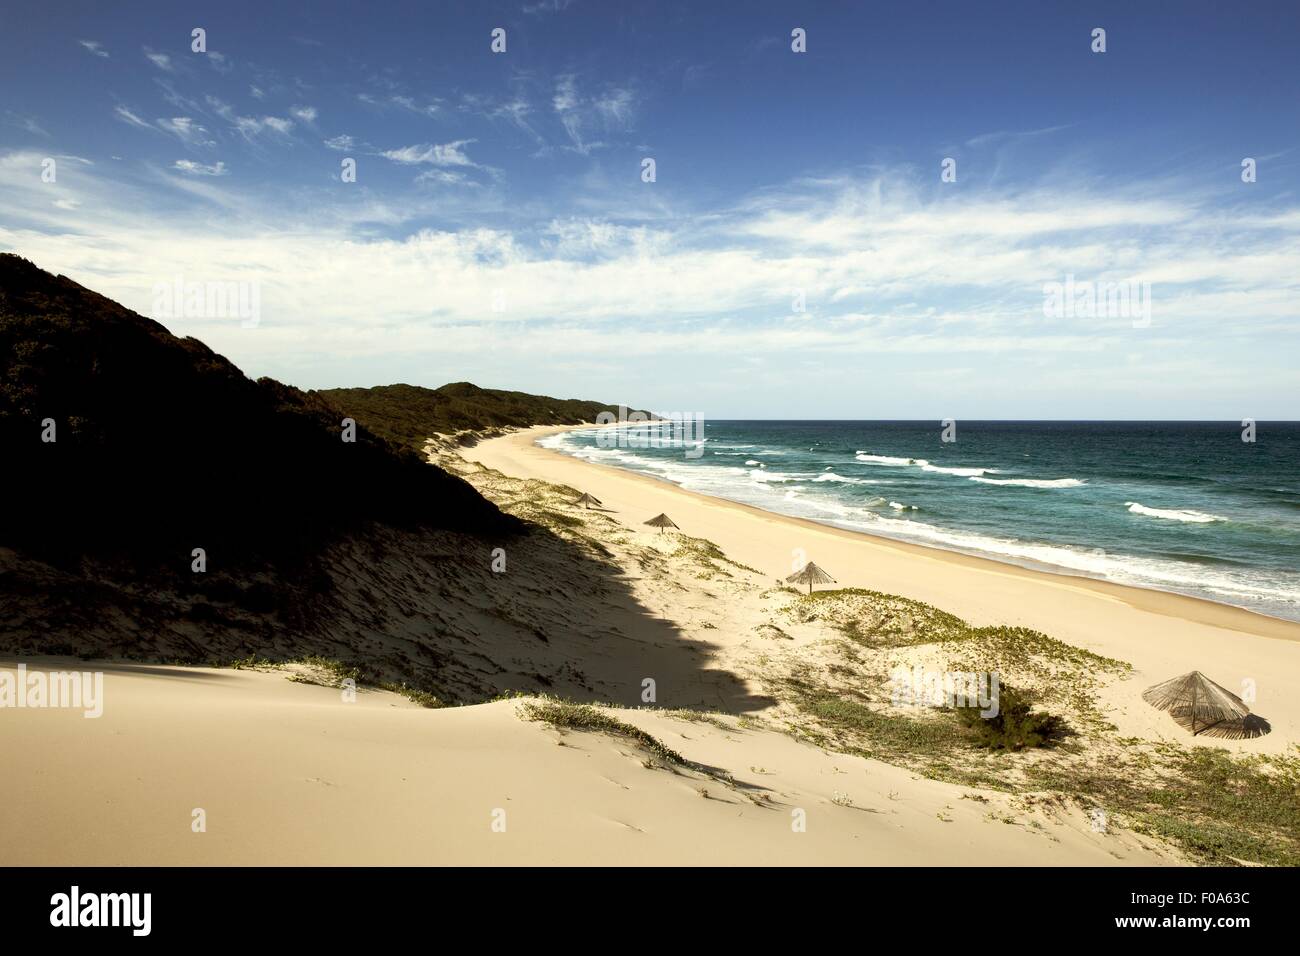 View of Maputaland Marine Reserve on beach at South Africa Stock Photo